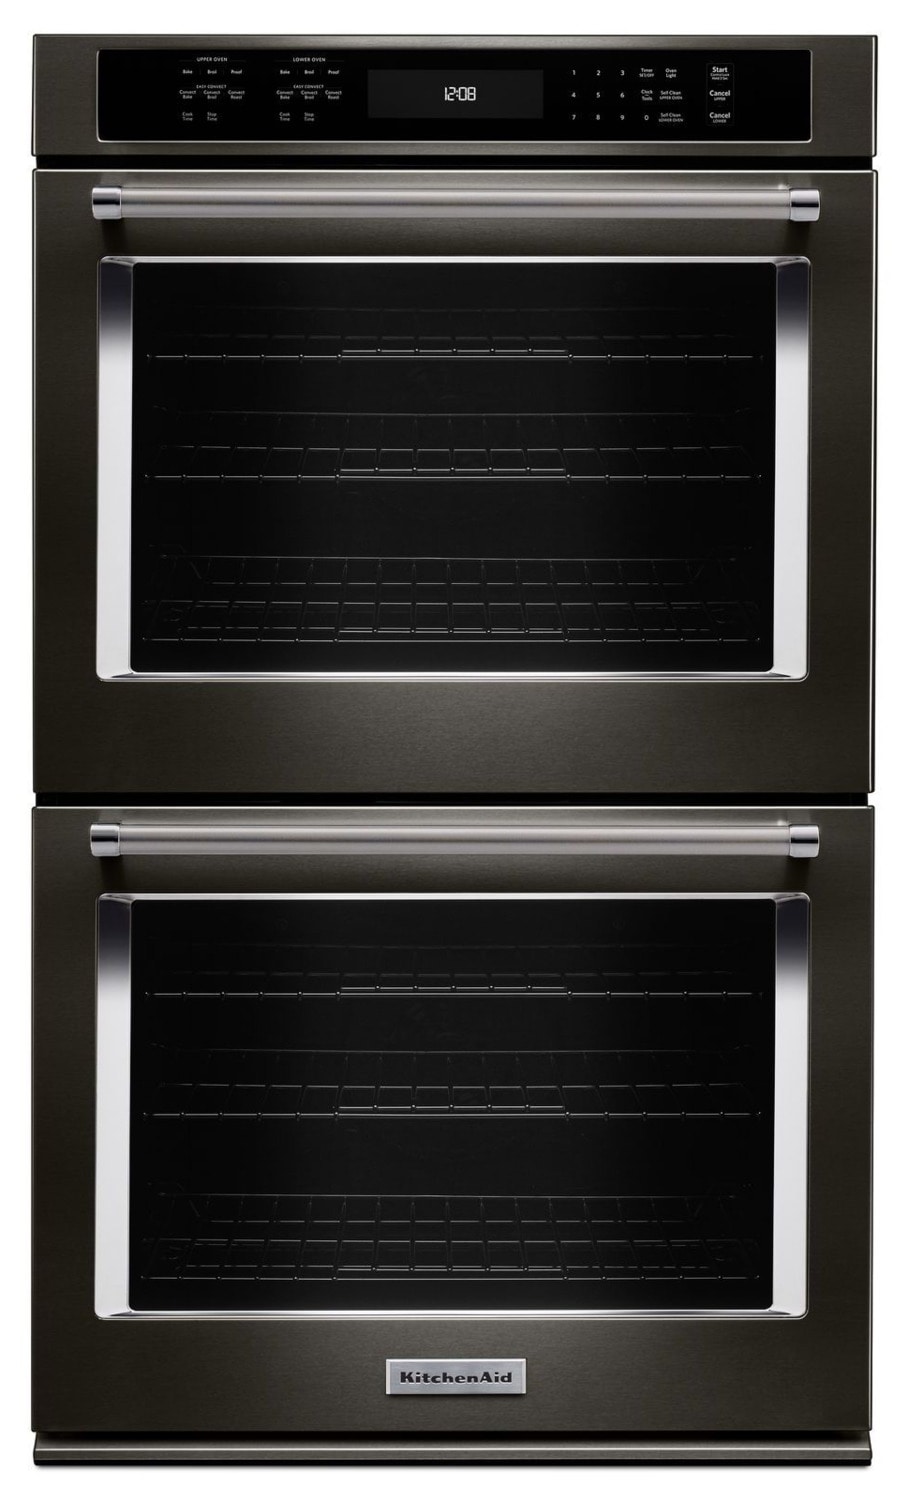 KitchenAid Black Stainless Steel Double Wall Oven (10 Cu. Ft Black Stainless Steel Double Wall Oven